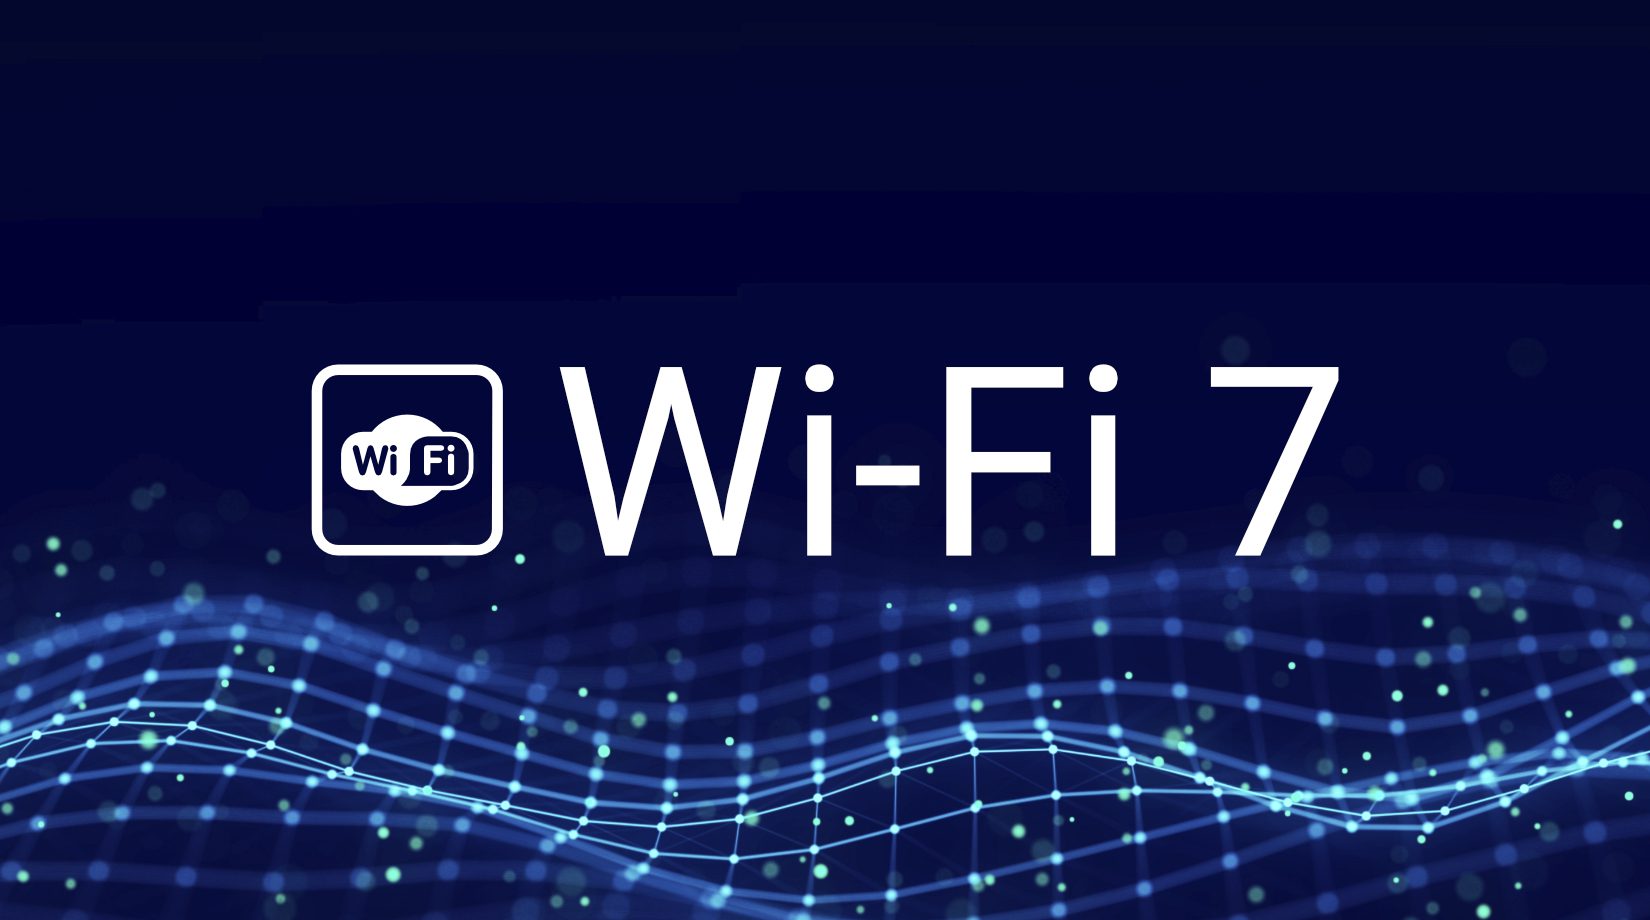 Wi-Fi 7: Examining its Features and Benefits for Public Transport